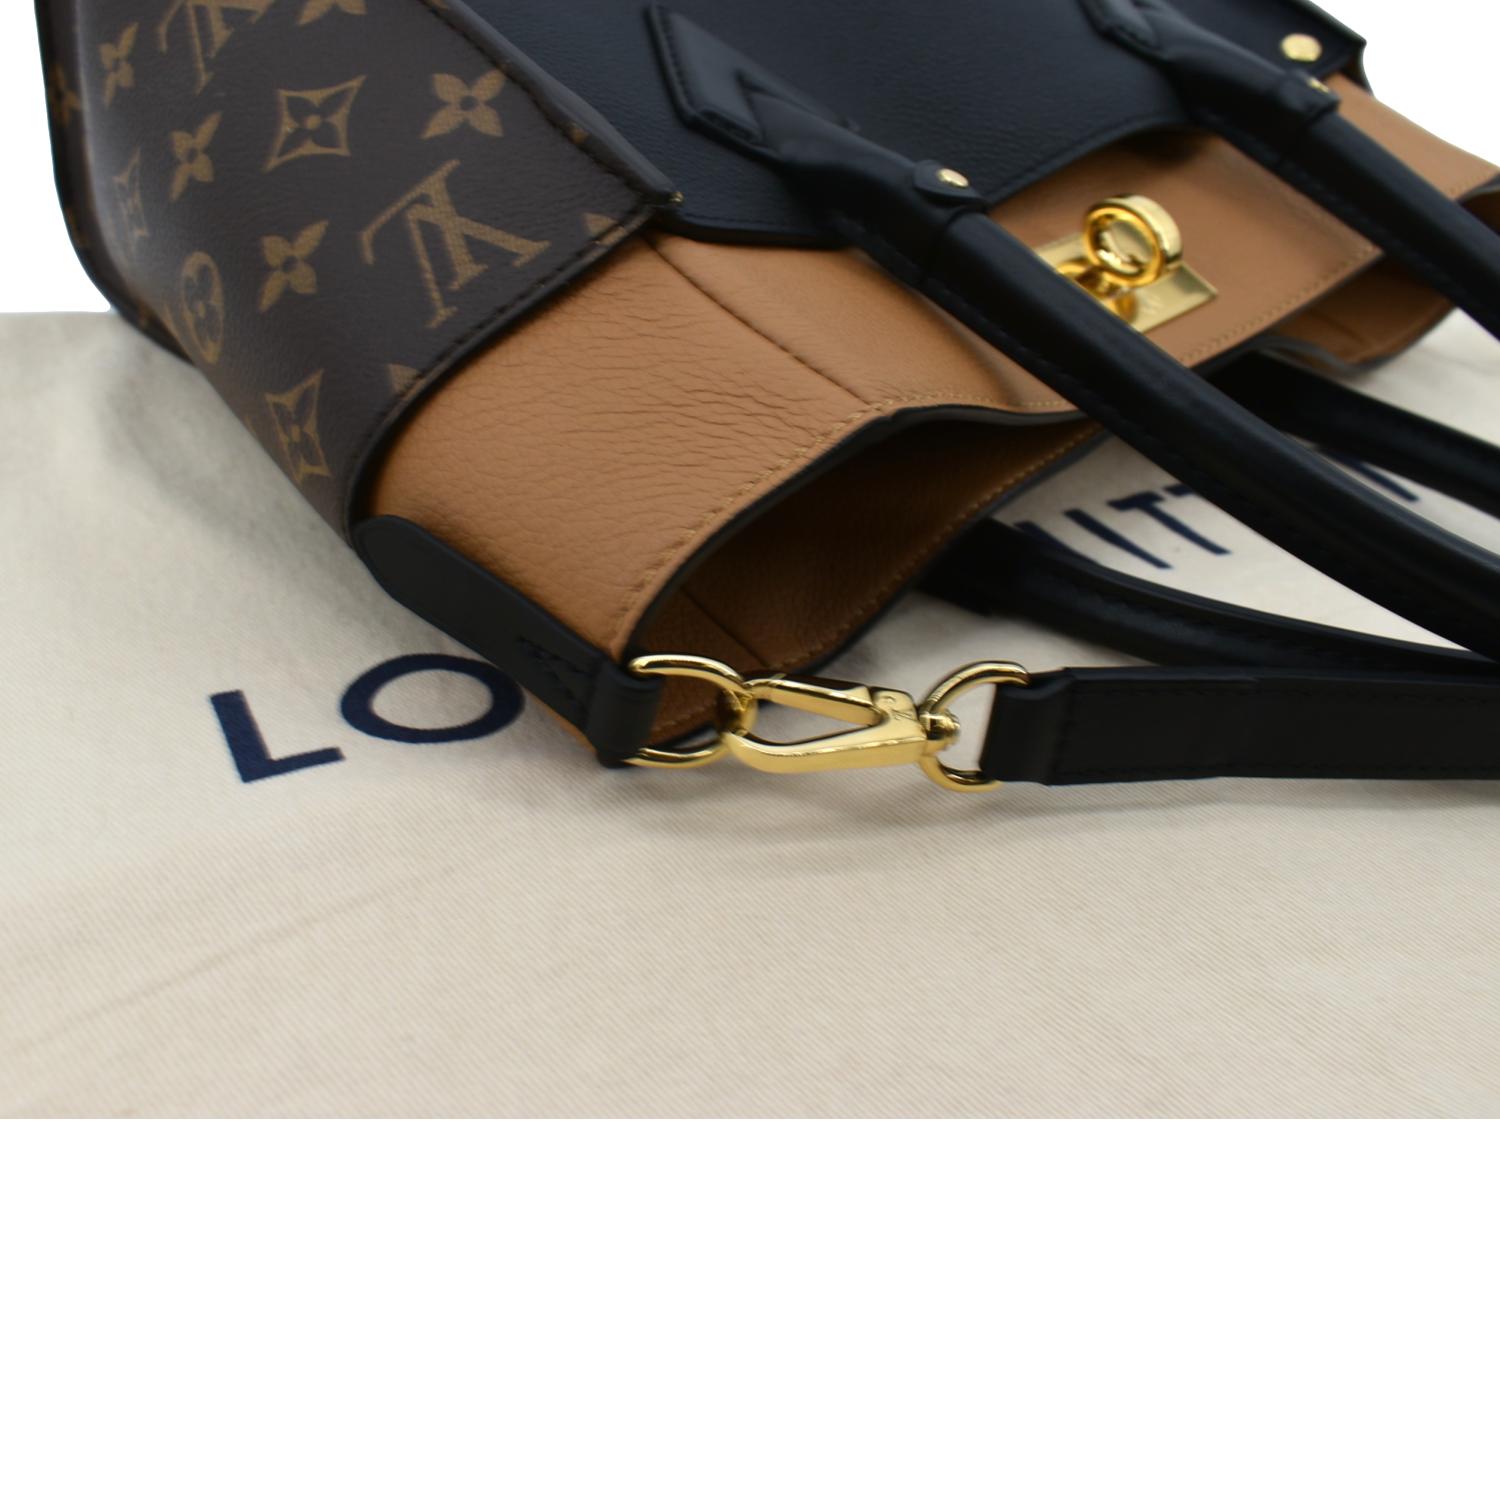 LOUIS VUITTON ON MY SIDE MONOGRAM MM TOTE